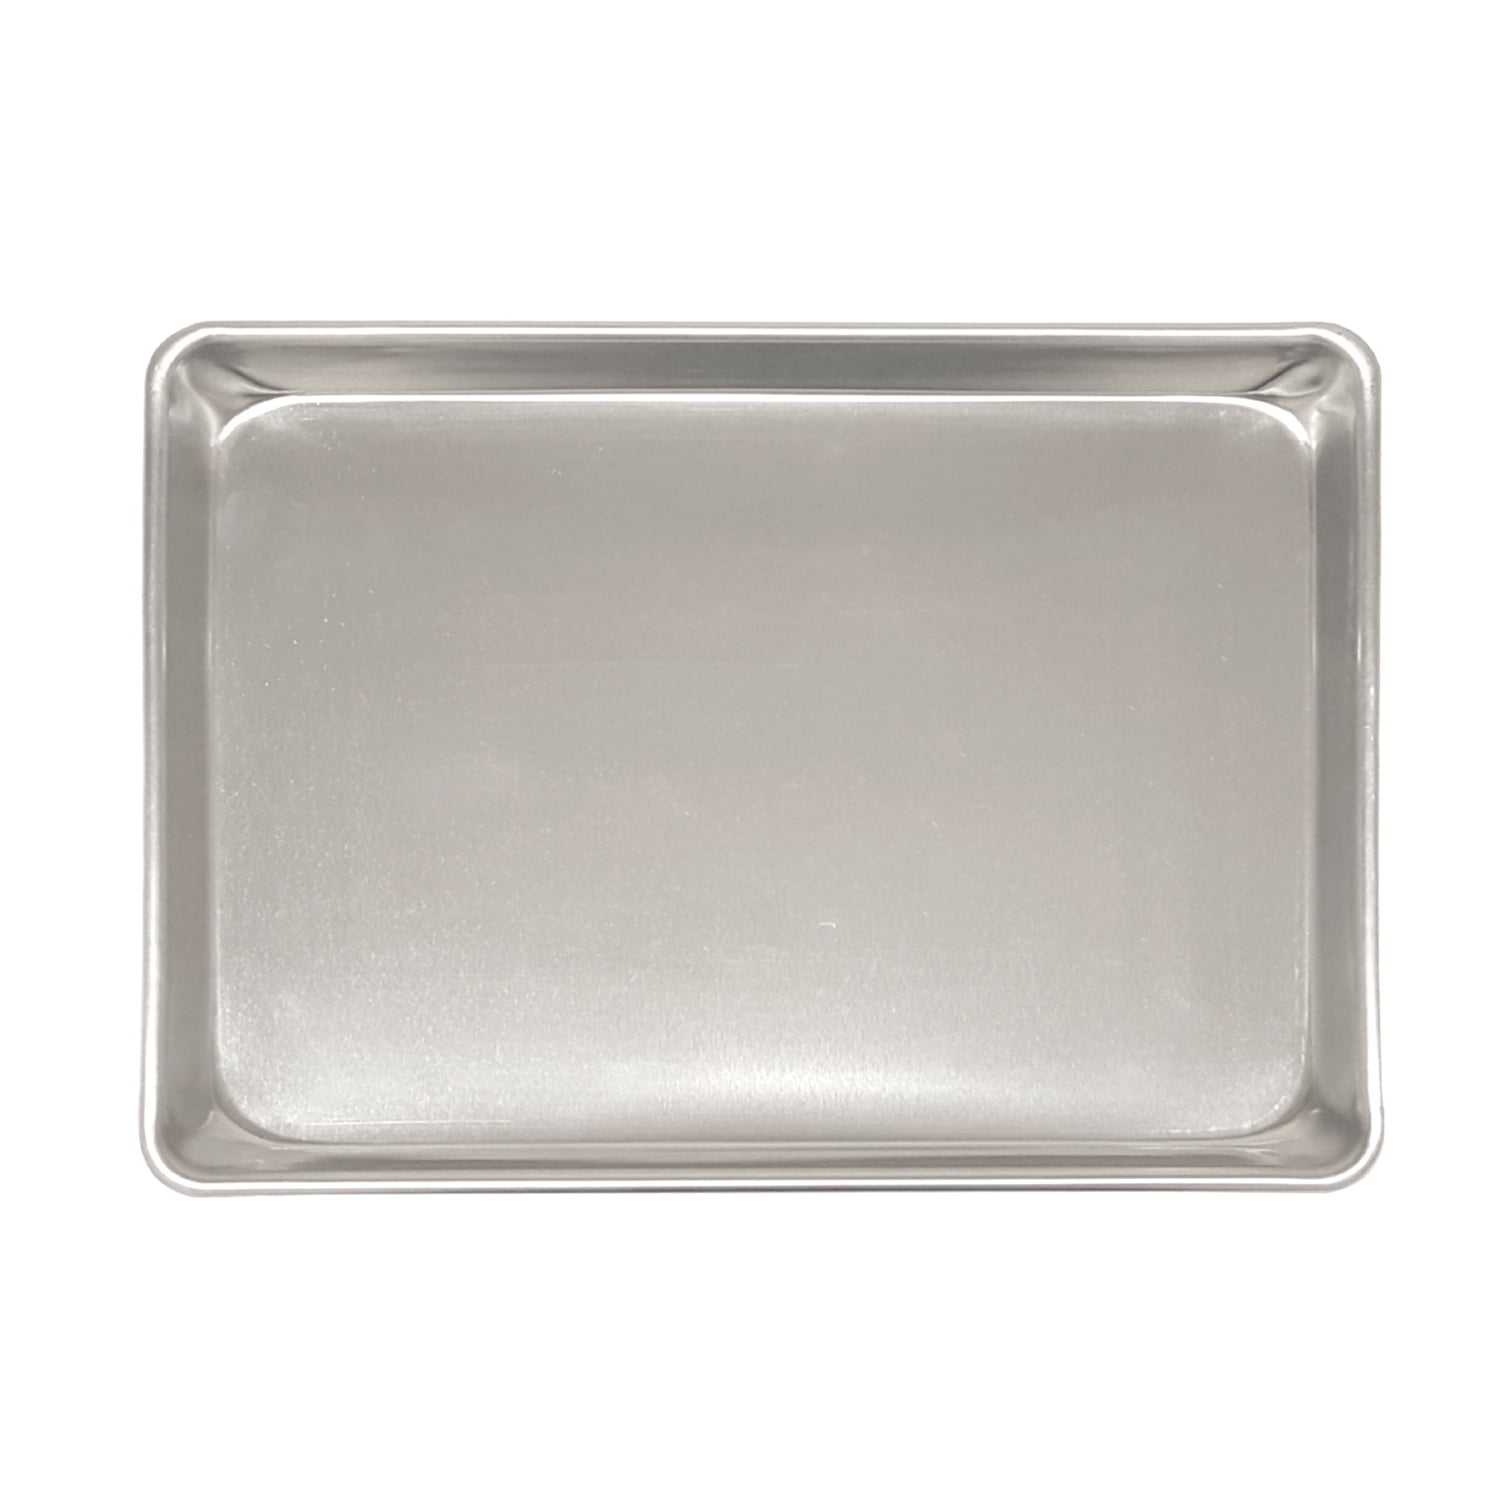  Full Size Pan Extender, 18 x 26 x 2 : Home & Kitchen